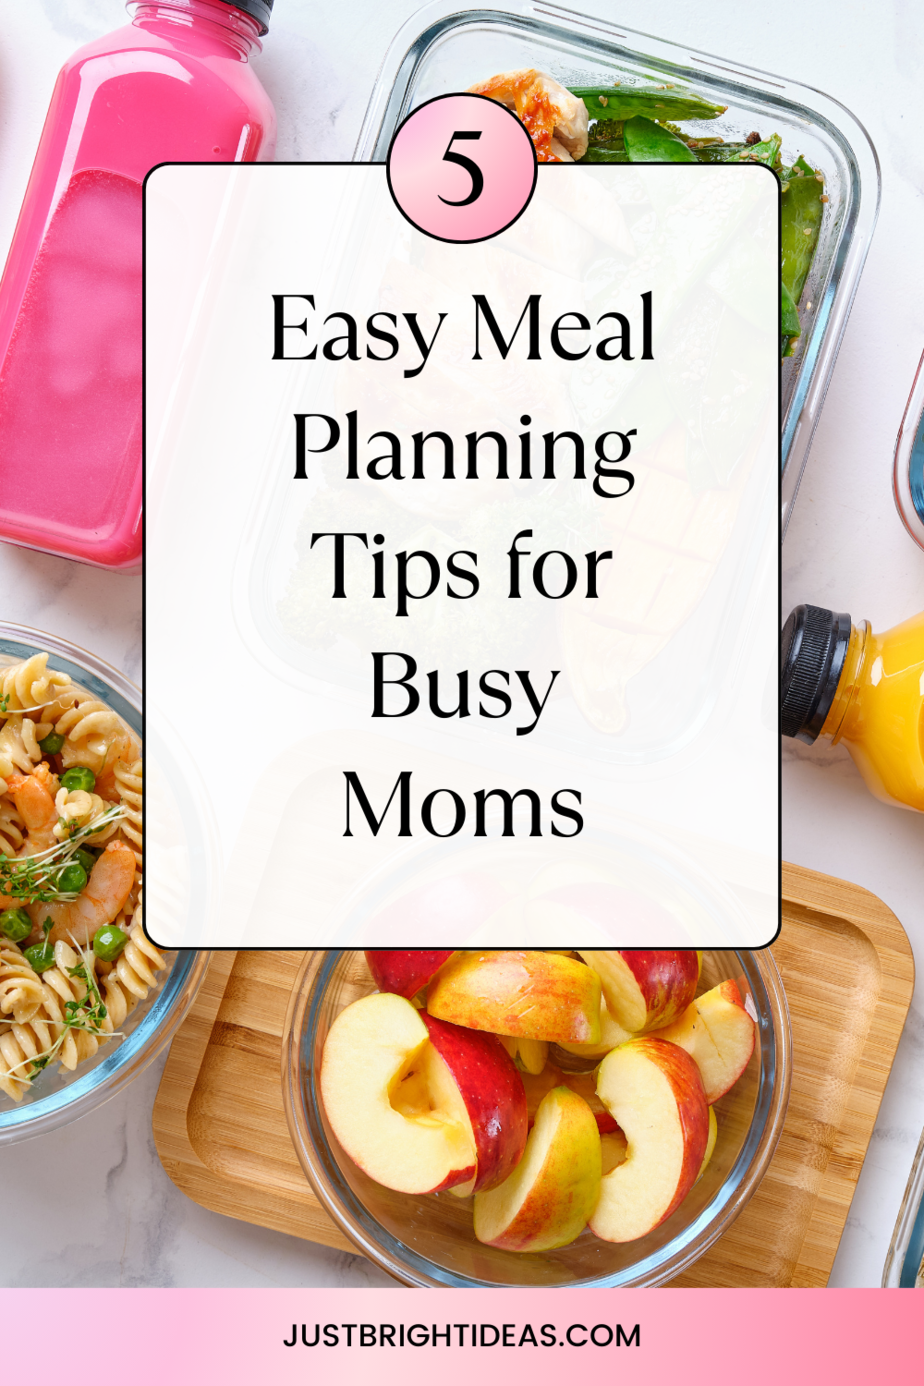 🍽️ Calling all busy moms! Say goodbye to mealtime chaos and hello to meal planning mastery🌟 Discover how to save time, money, and sanity with our meal planning tips tailored just for you! 💪